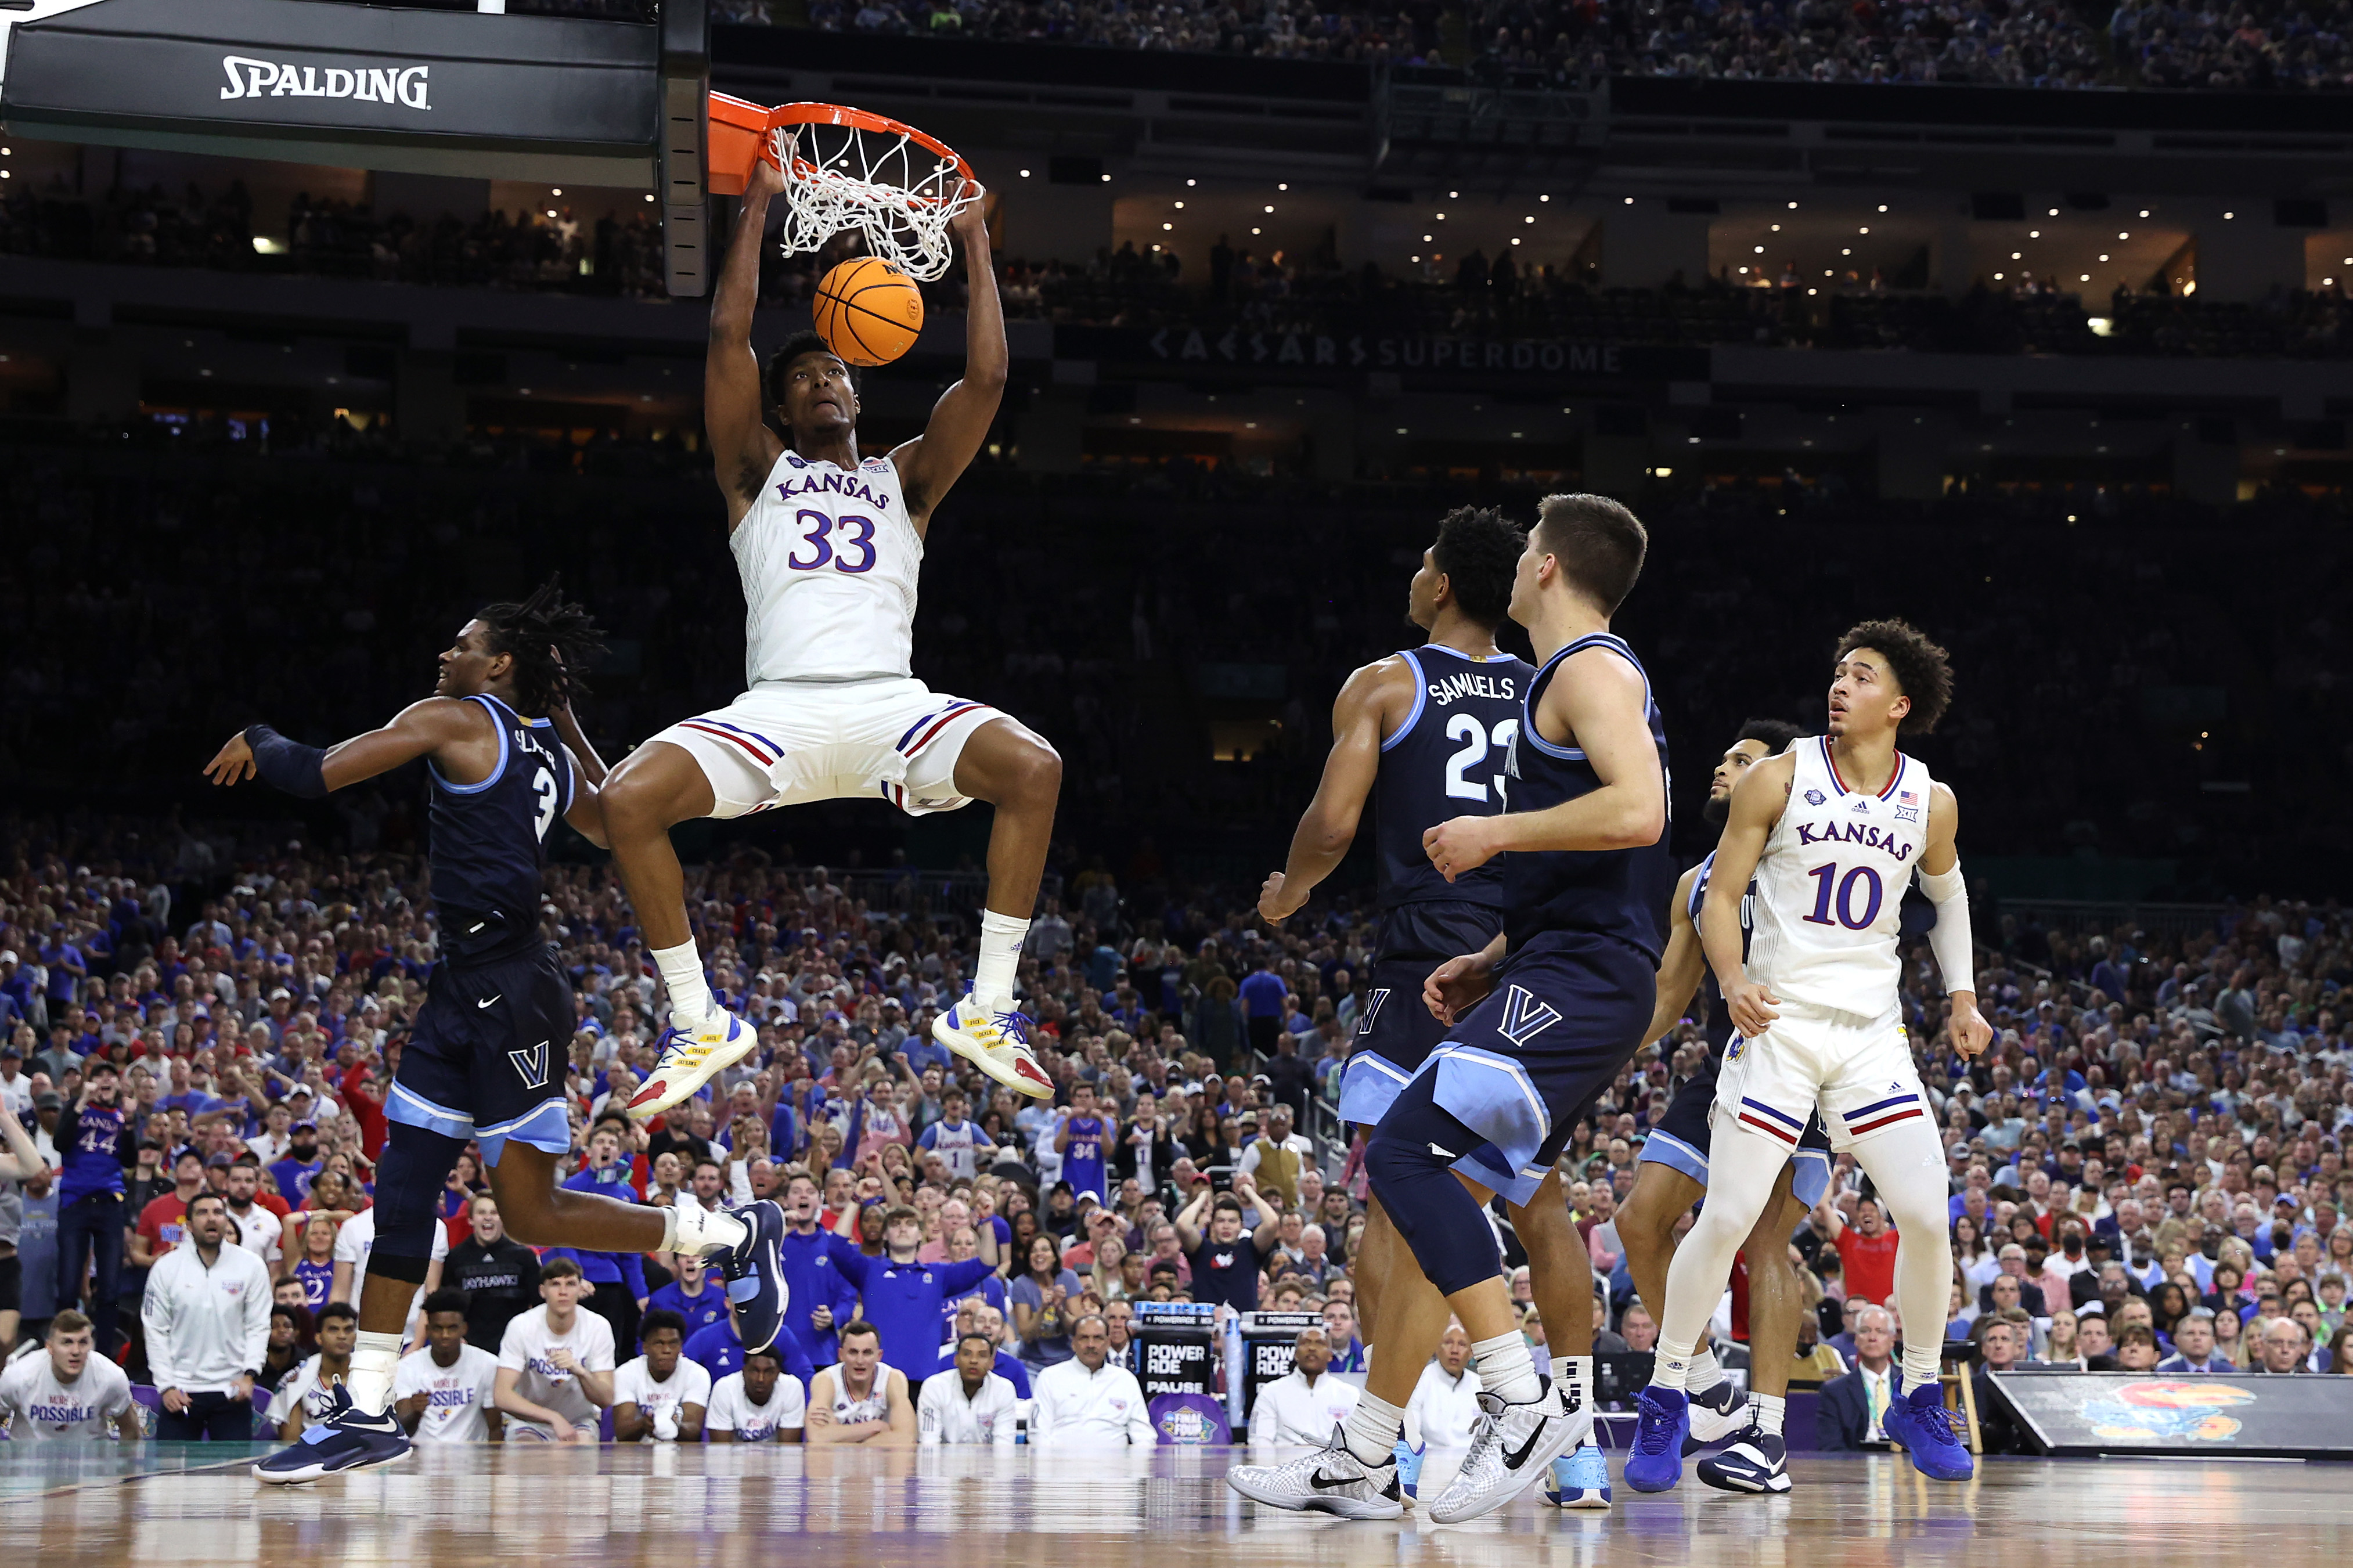 David McCormack #33 of the Kansas Jayhawks dunks against the Villanova Wildcats in the second half during the 2022 NCAA Men’s Basketball Tournament Final Four semifinal at Caesars Superdome on April 02, 2022 in New Orleans, Louisiana. The Kansas Jayhawks defeated the Villanova Wildcats 81-65.